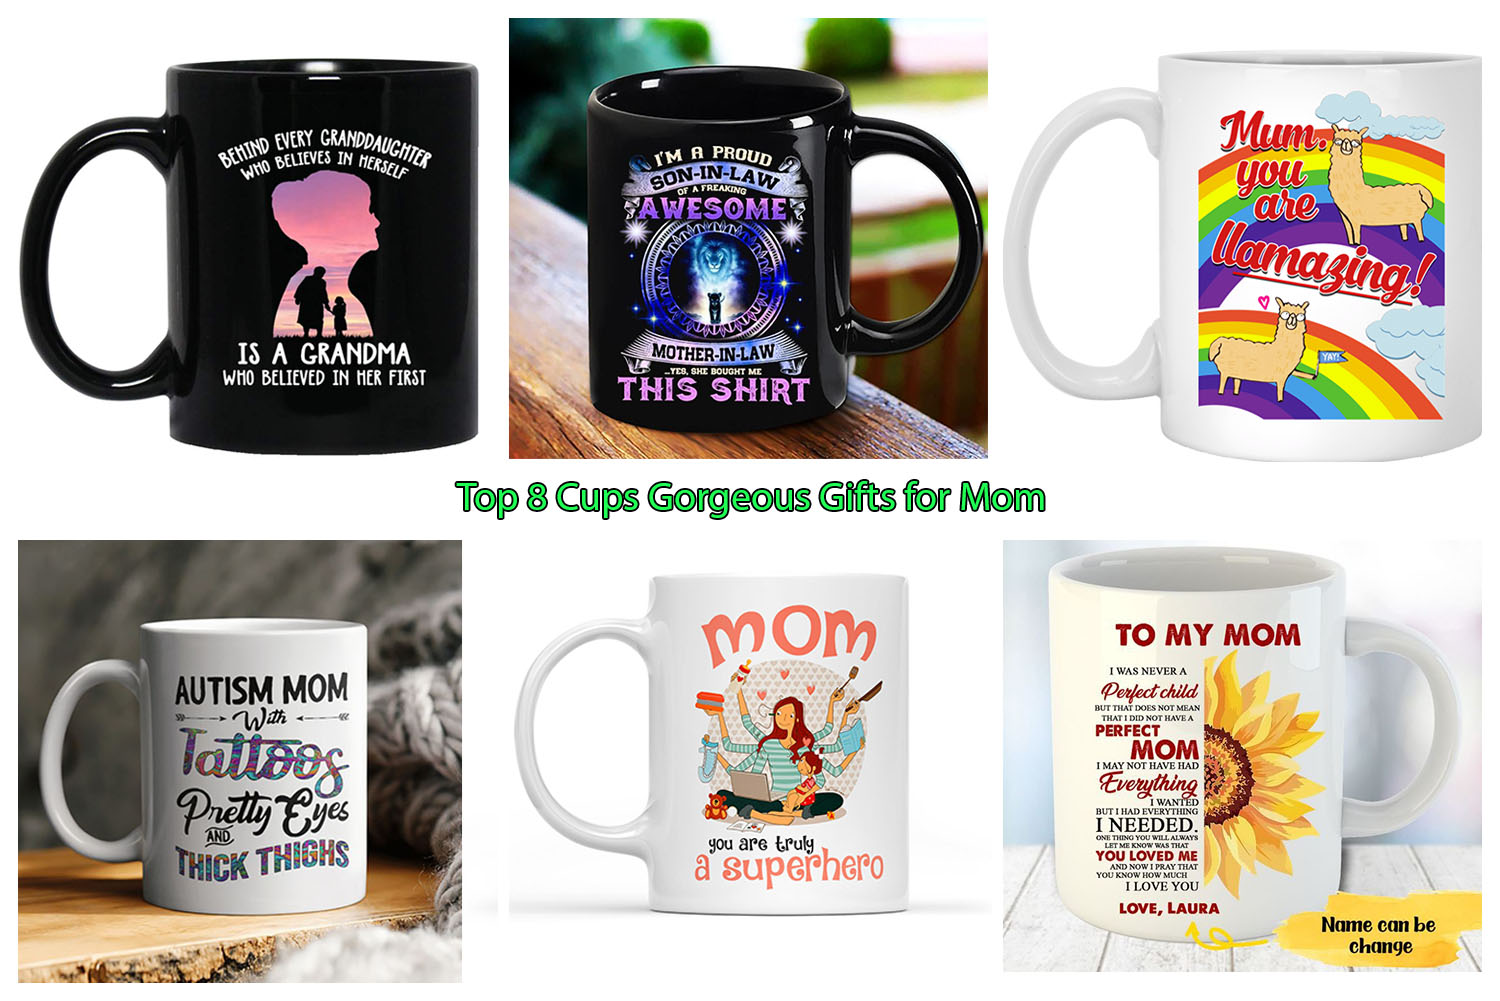 https://image.teehobbies.us/2022/05/Top-8-Cups-Gorgeous-Gifts-for-Mom.jpg